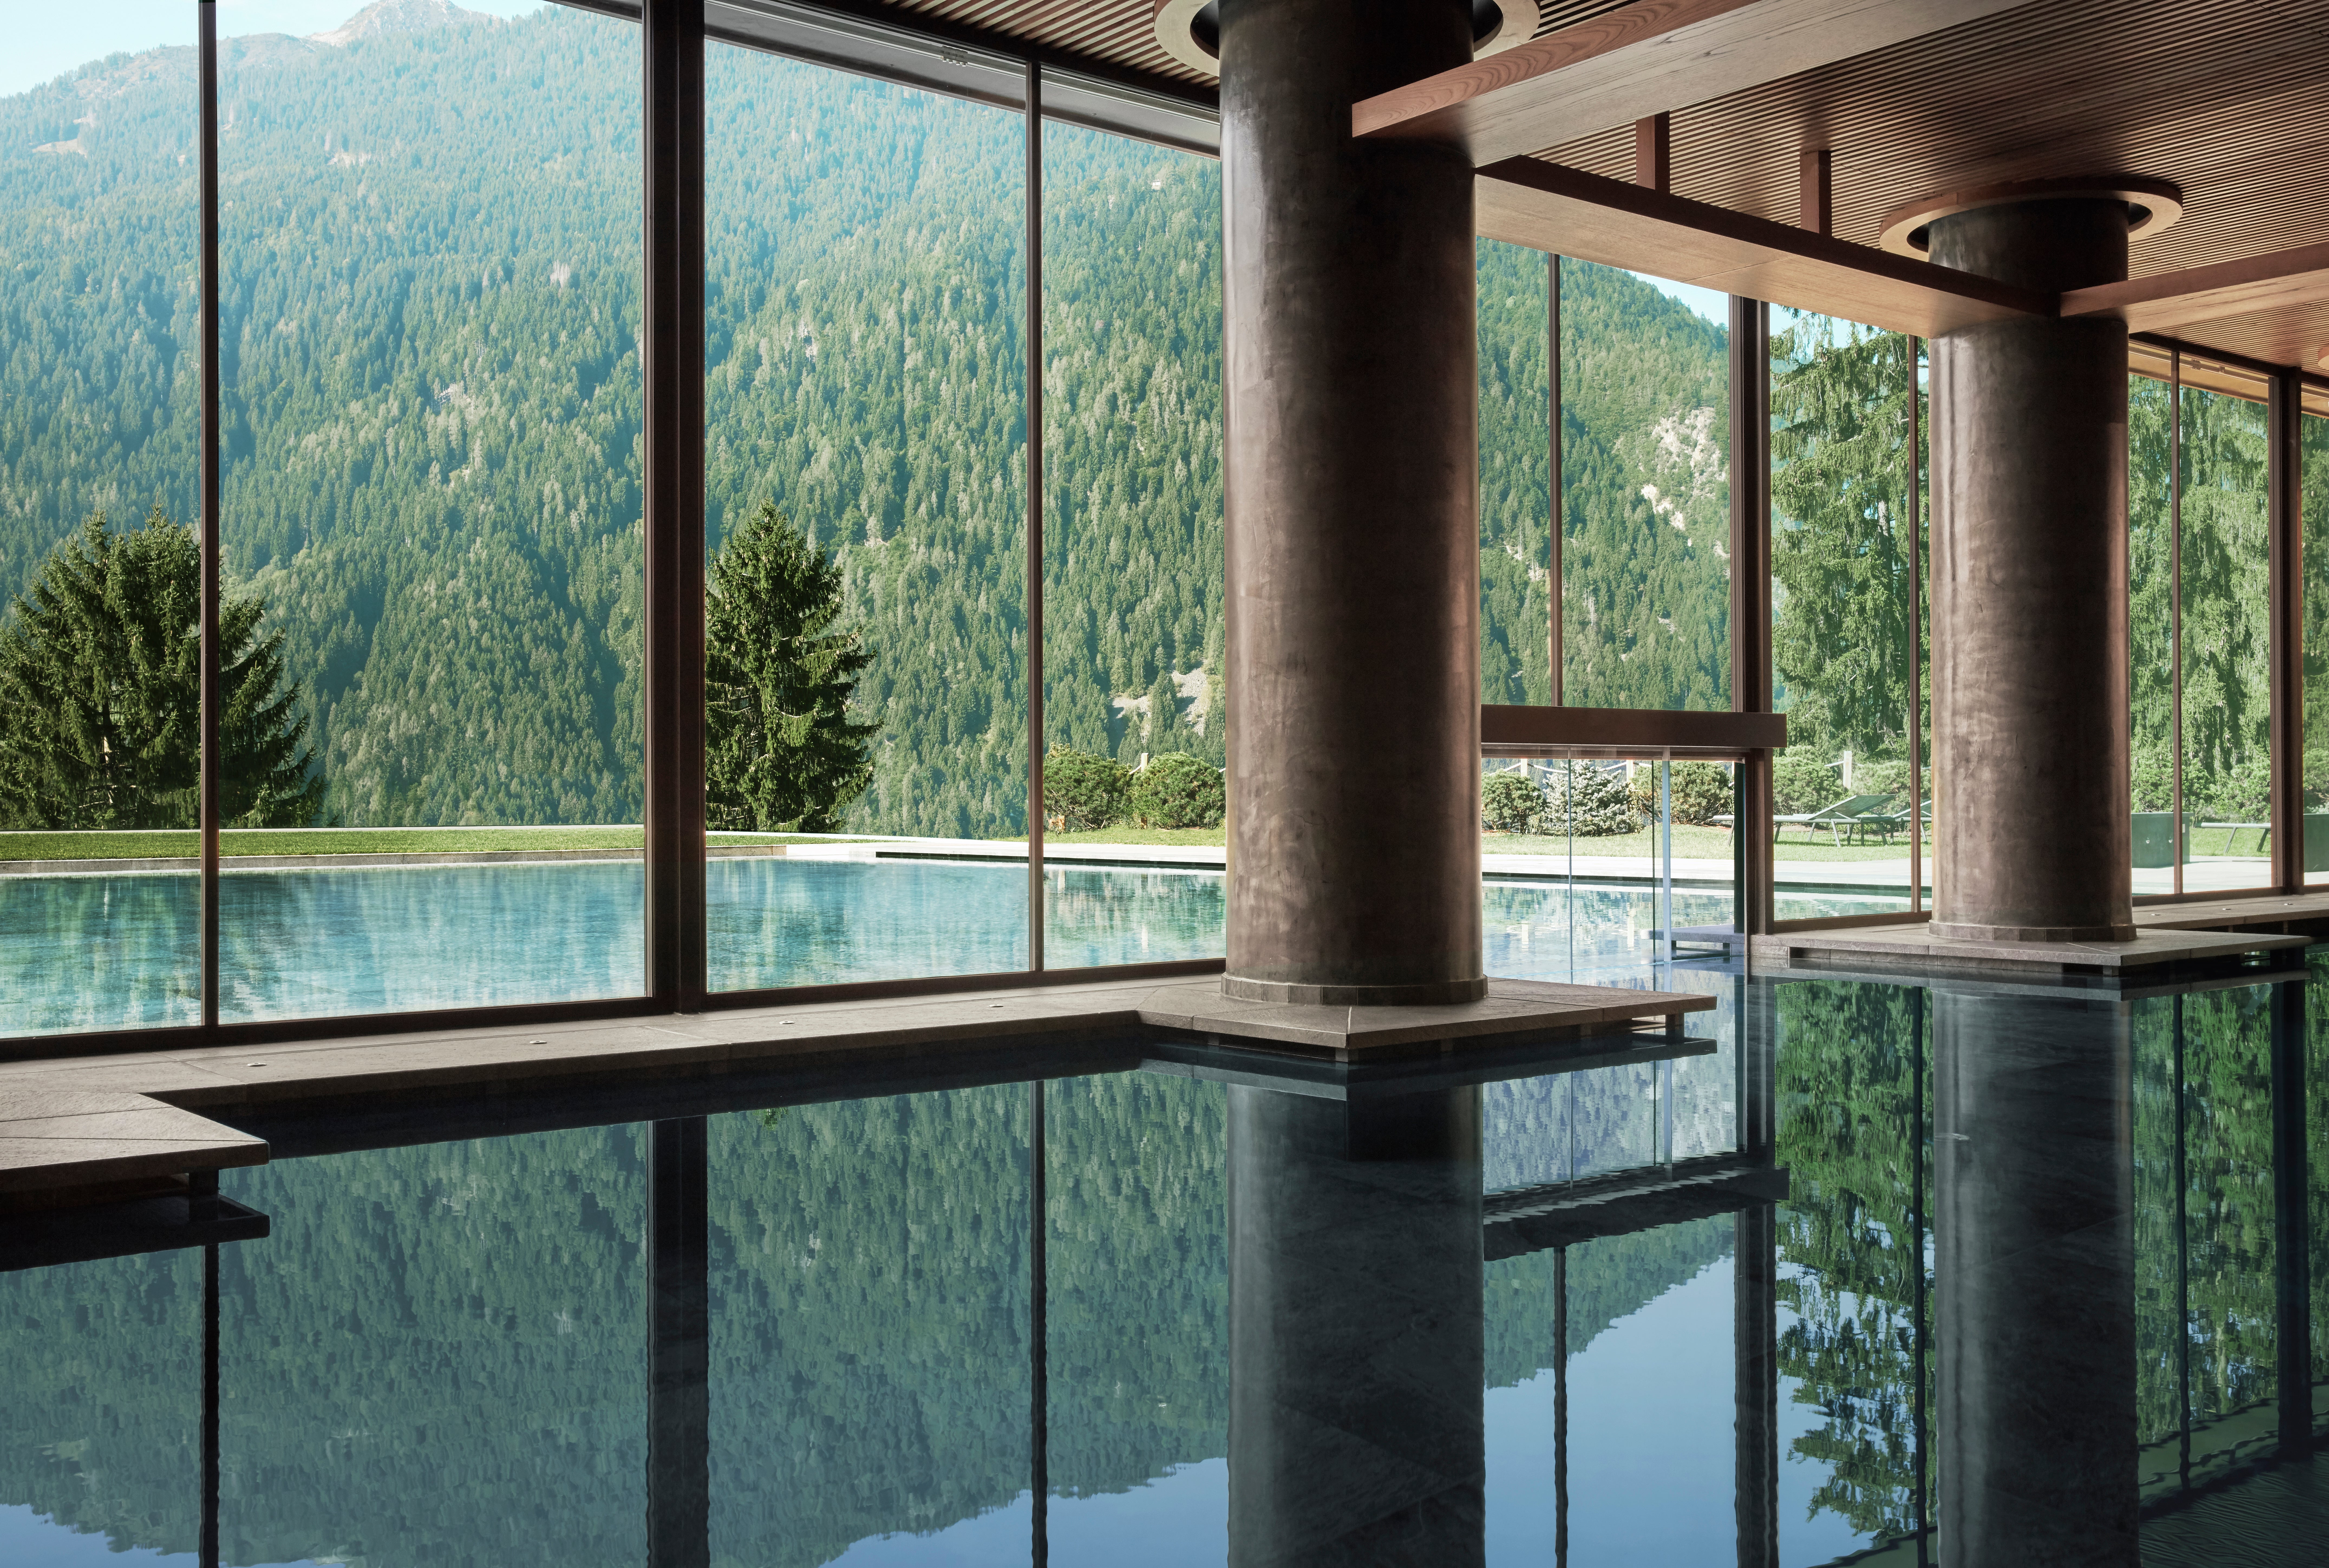 Why choose between indoor and outdoor pools when you can have both?